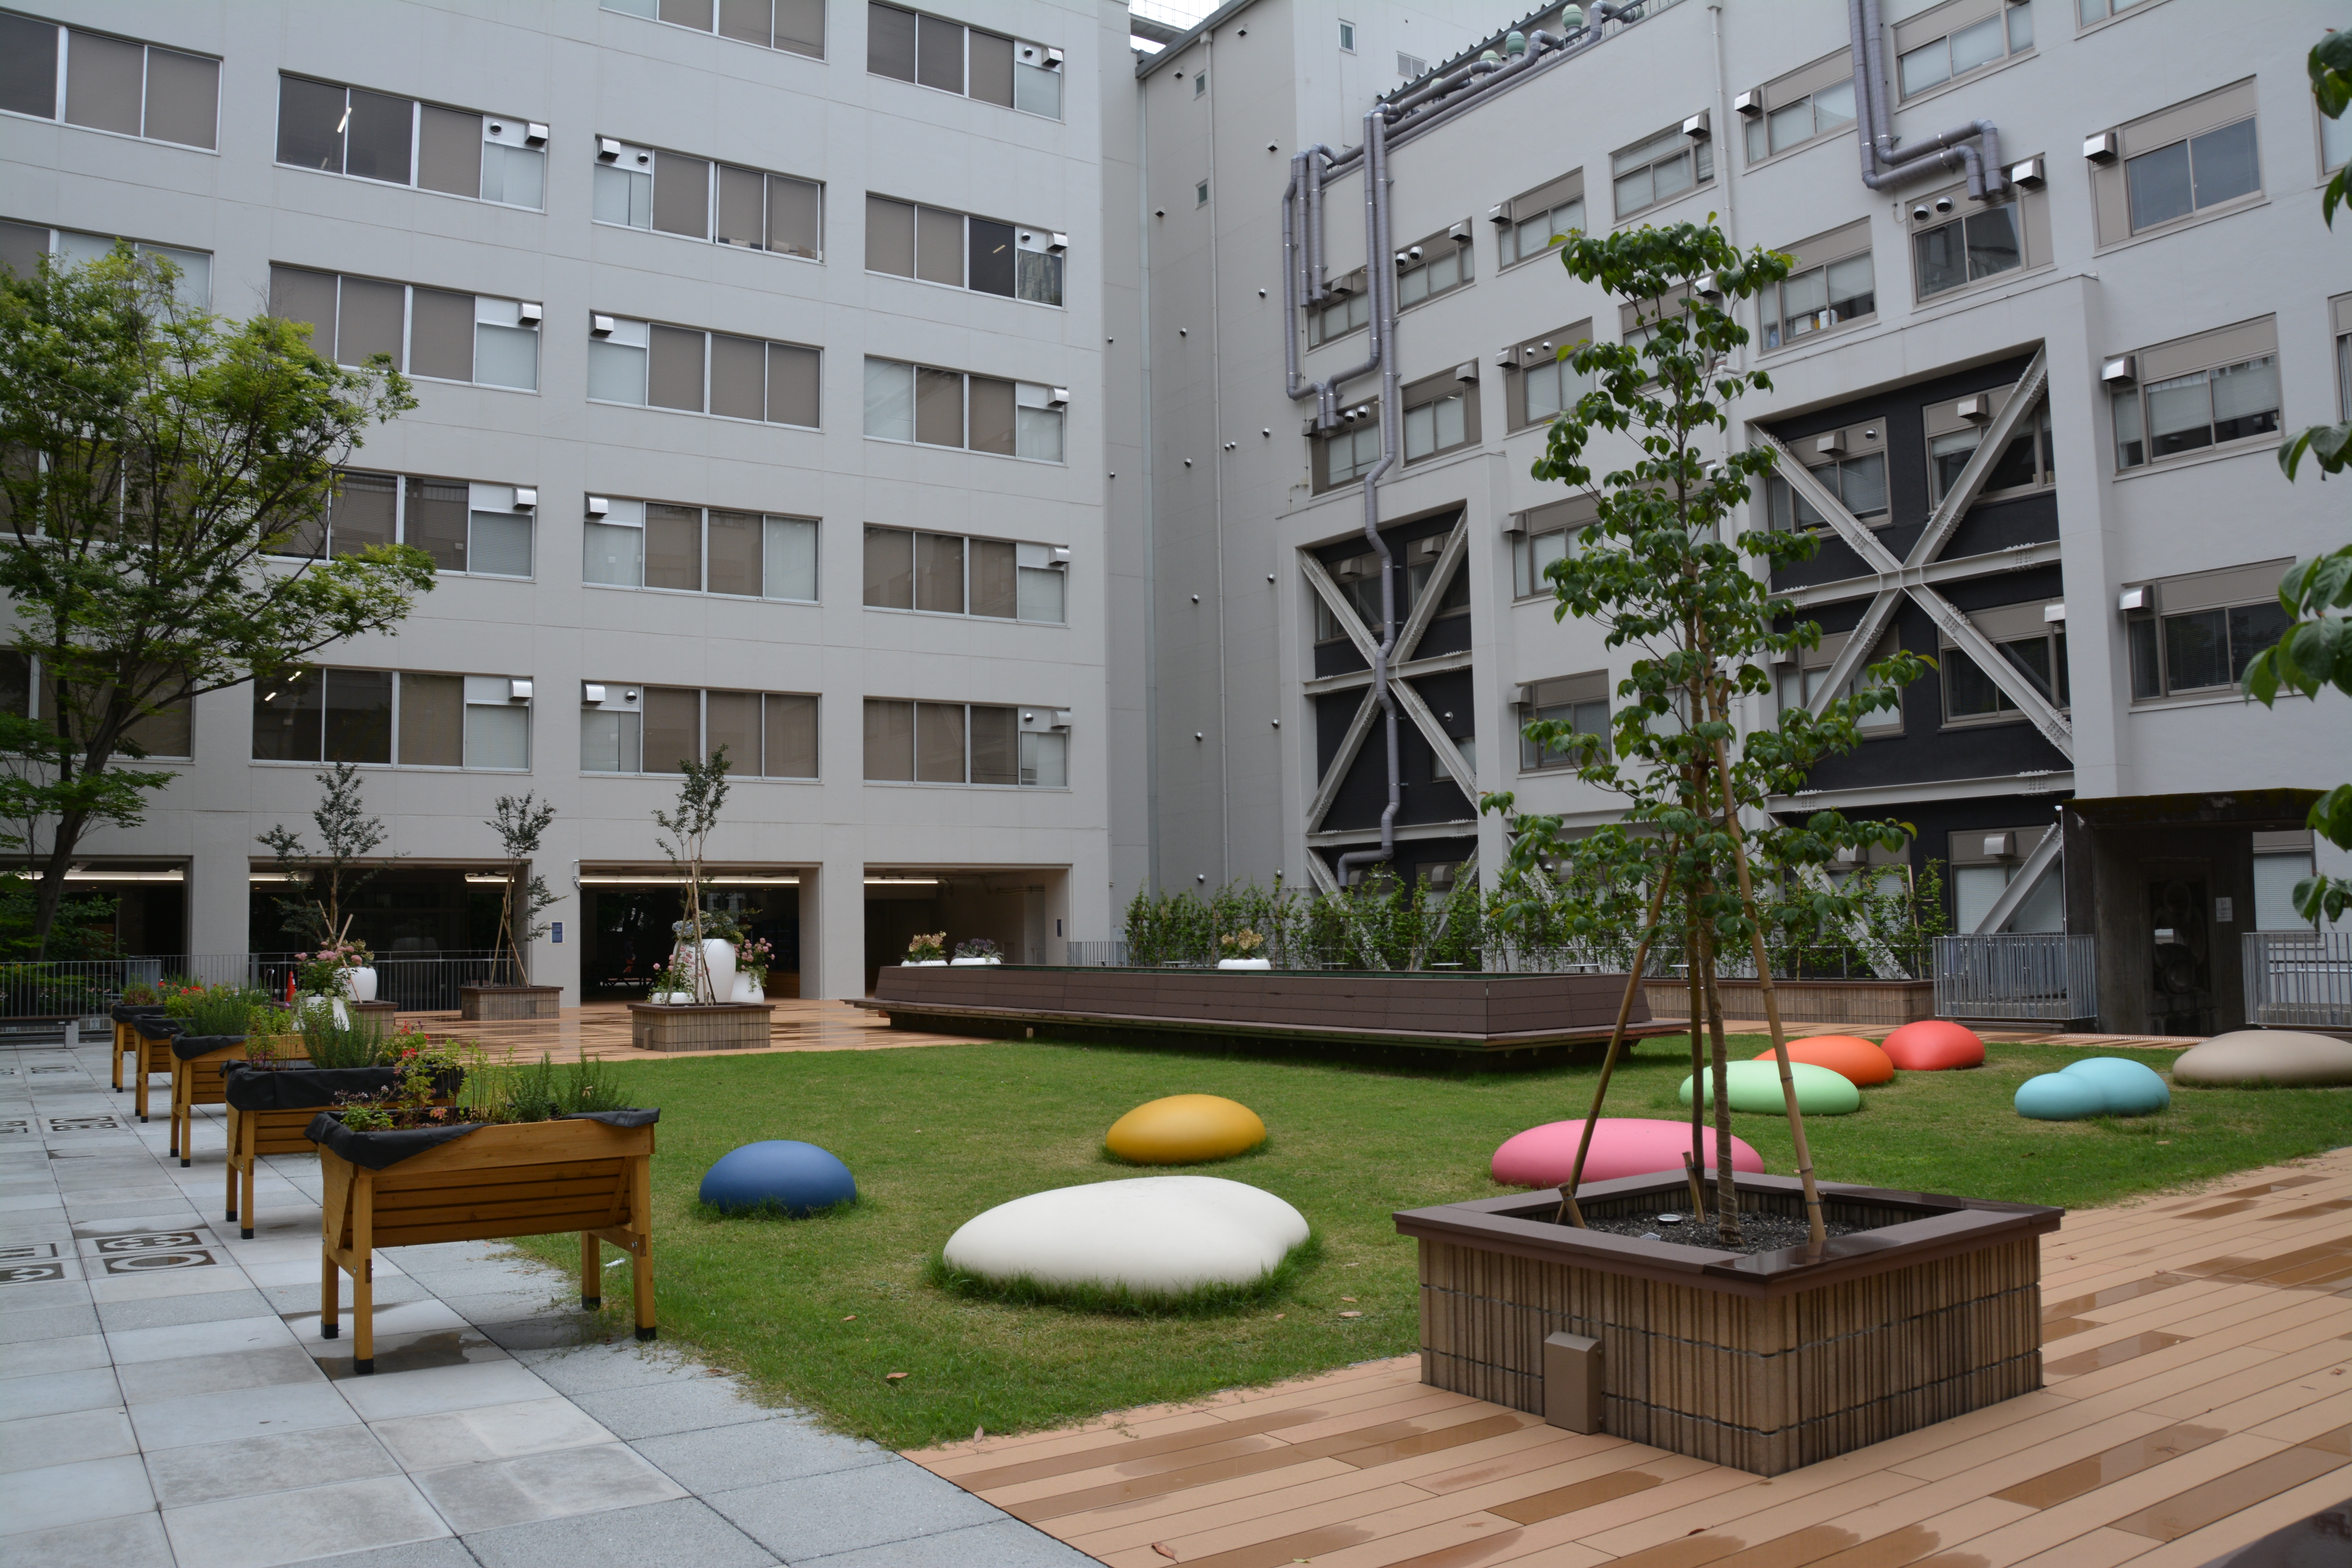 Rooftop Garden Completed Above Building No. 9’s Active Commons